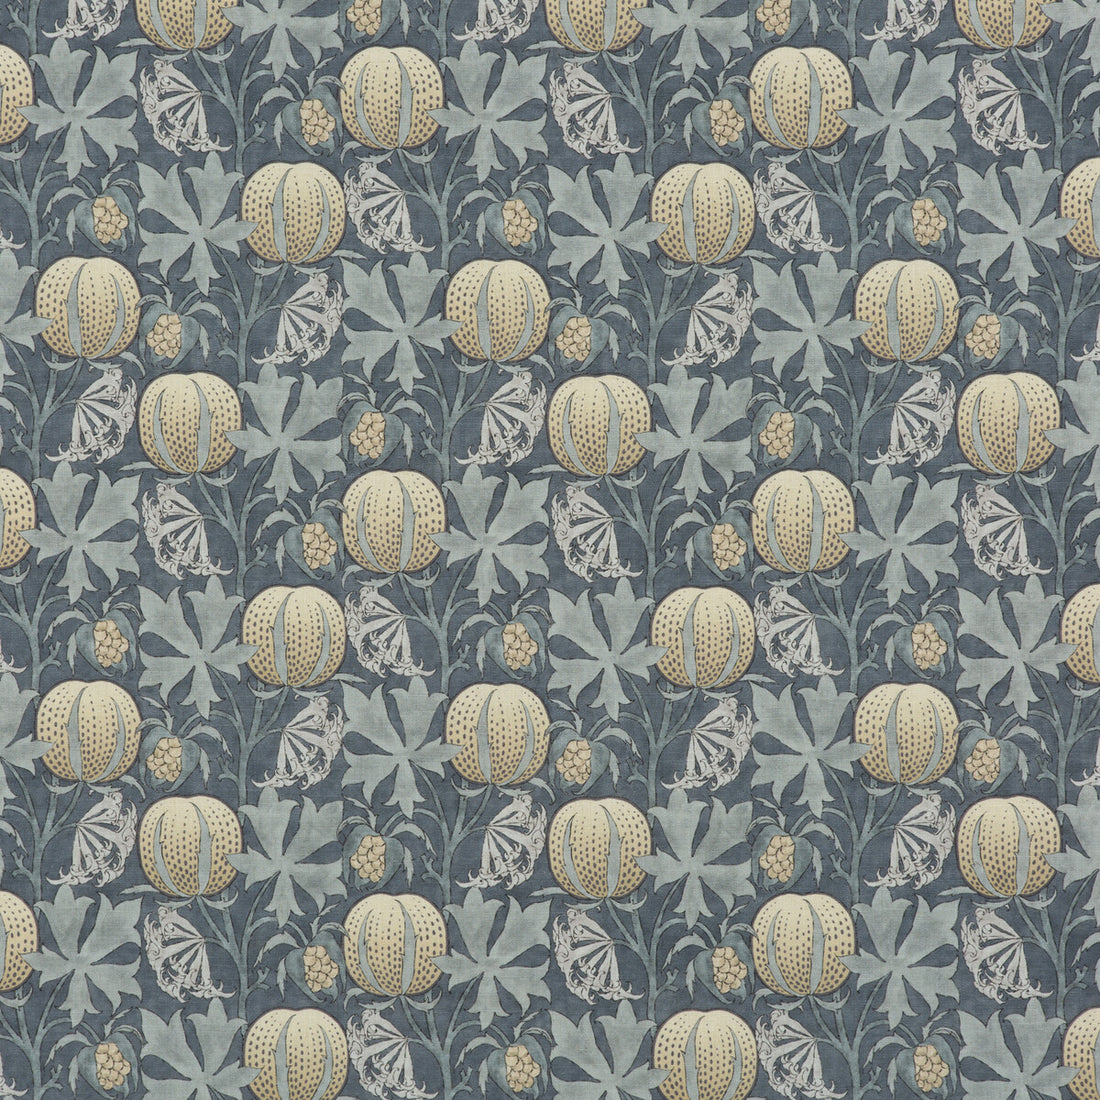 Pumpkins fabric in indigo color - pattern BP10621.1.0 - by G P &amp; J Baker in the Originals V collection